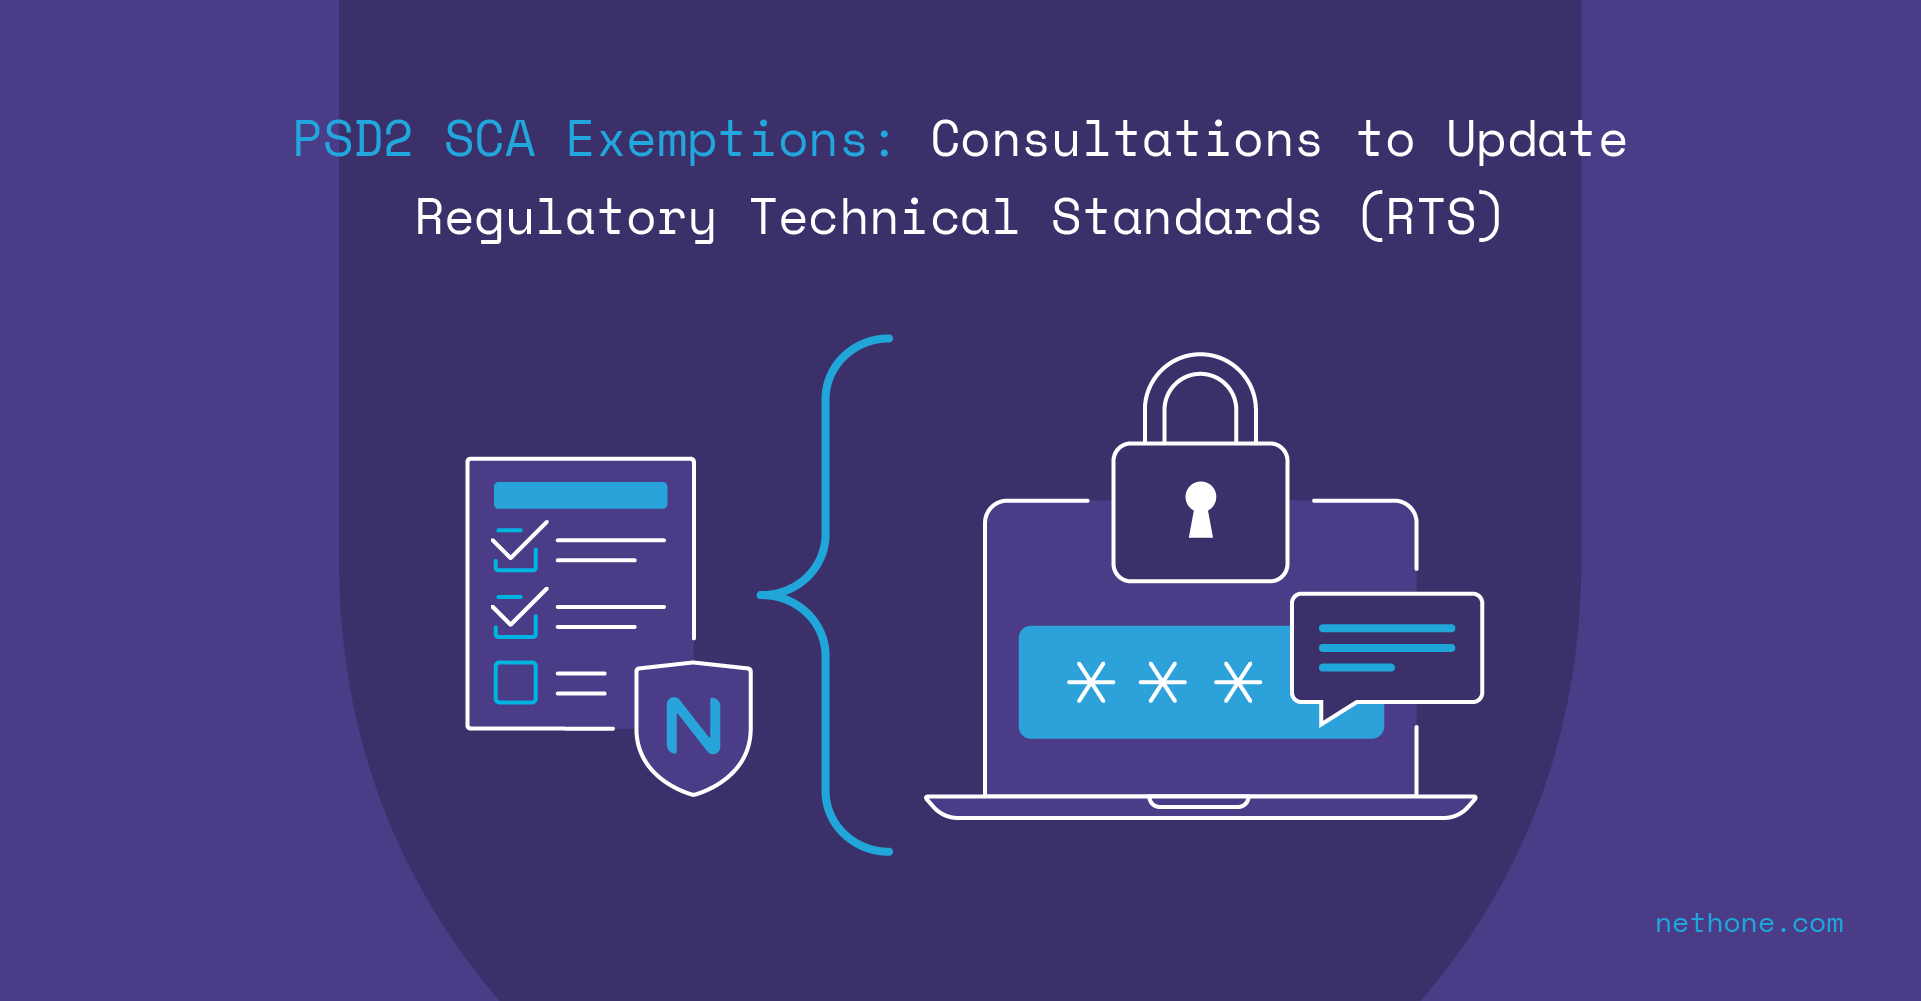 PSD2 Exemptions: Update to Regulatory Technical Standards (RTS)